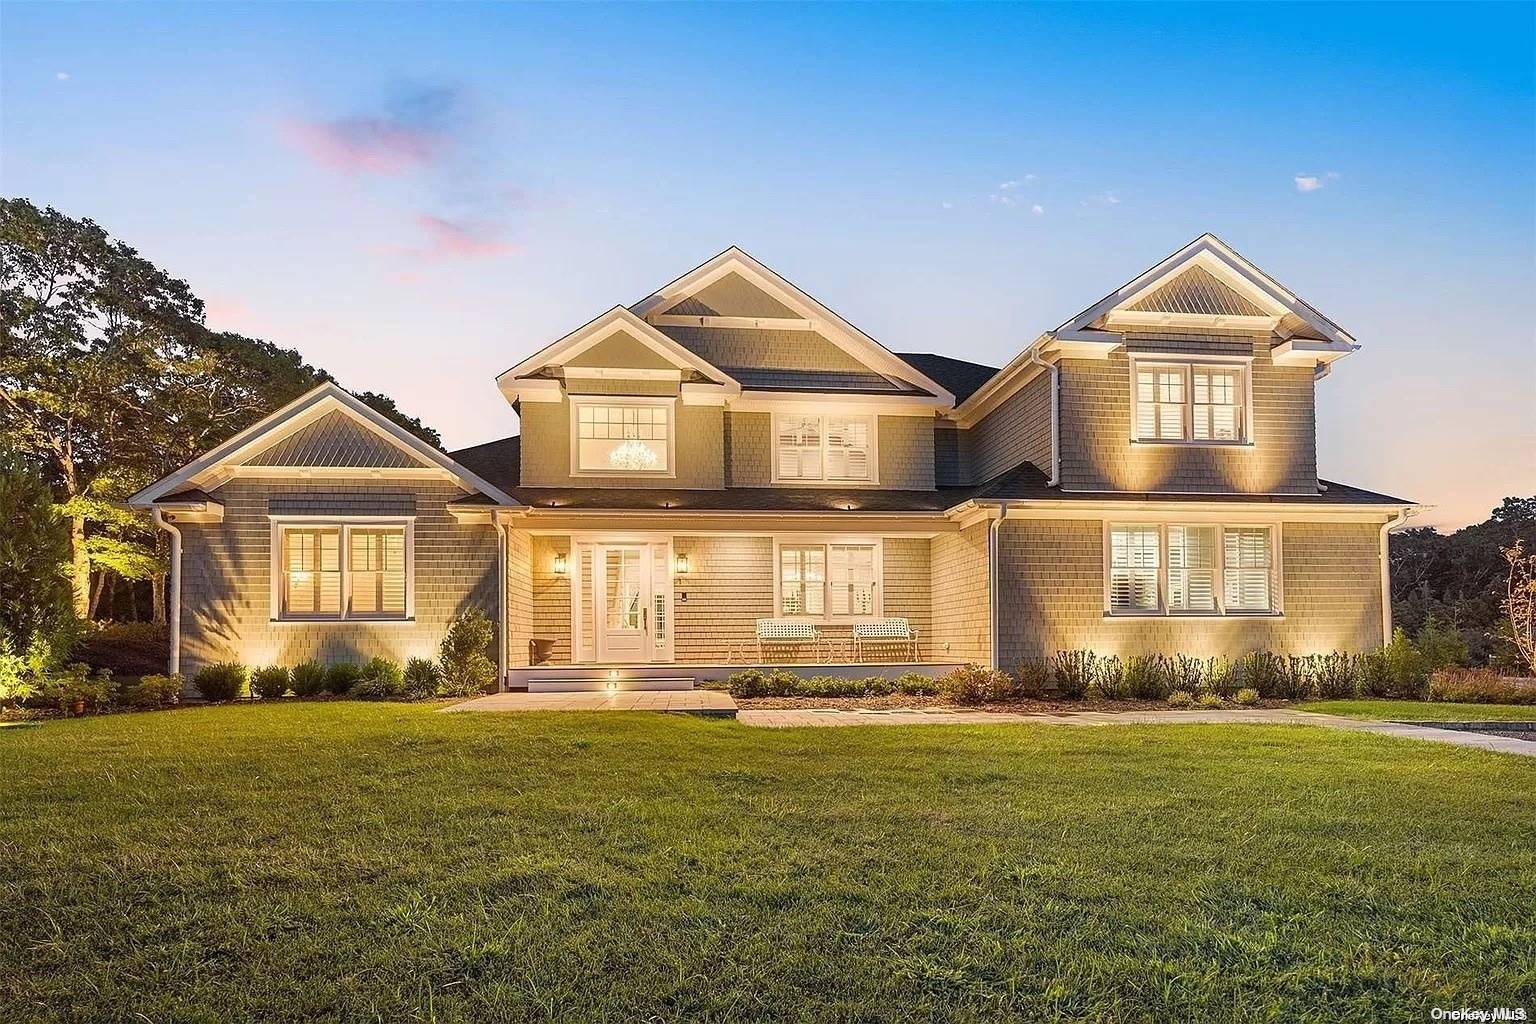 Property for Sale at 1 Carwin Lane, Westhampton Beach, Hamptons, NY - Bedrooms: 6 
Bathrooms: 6  - $3,495,000